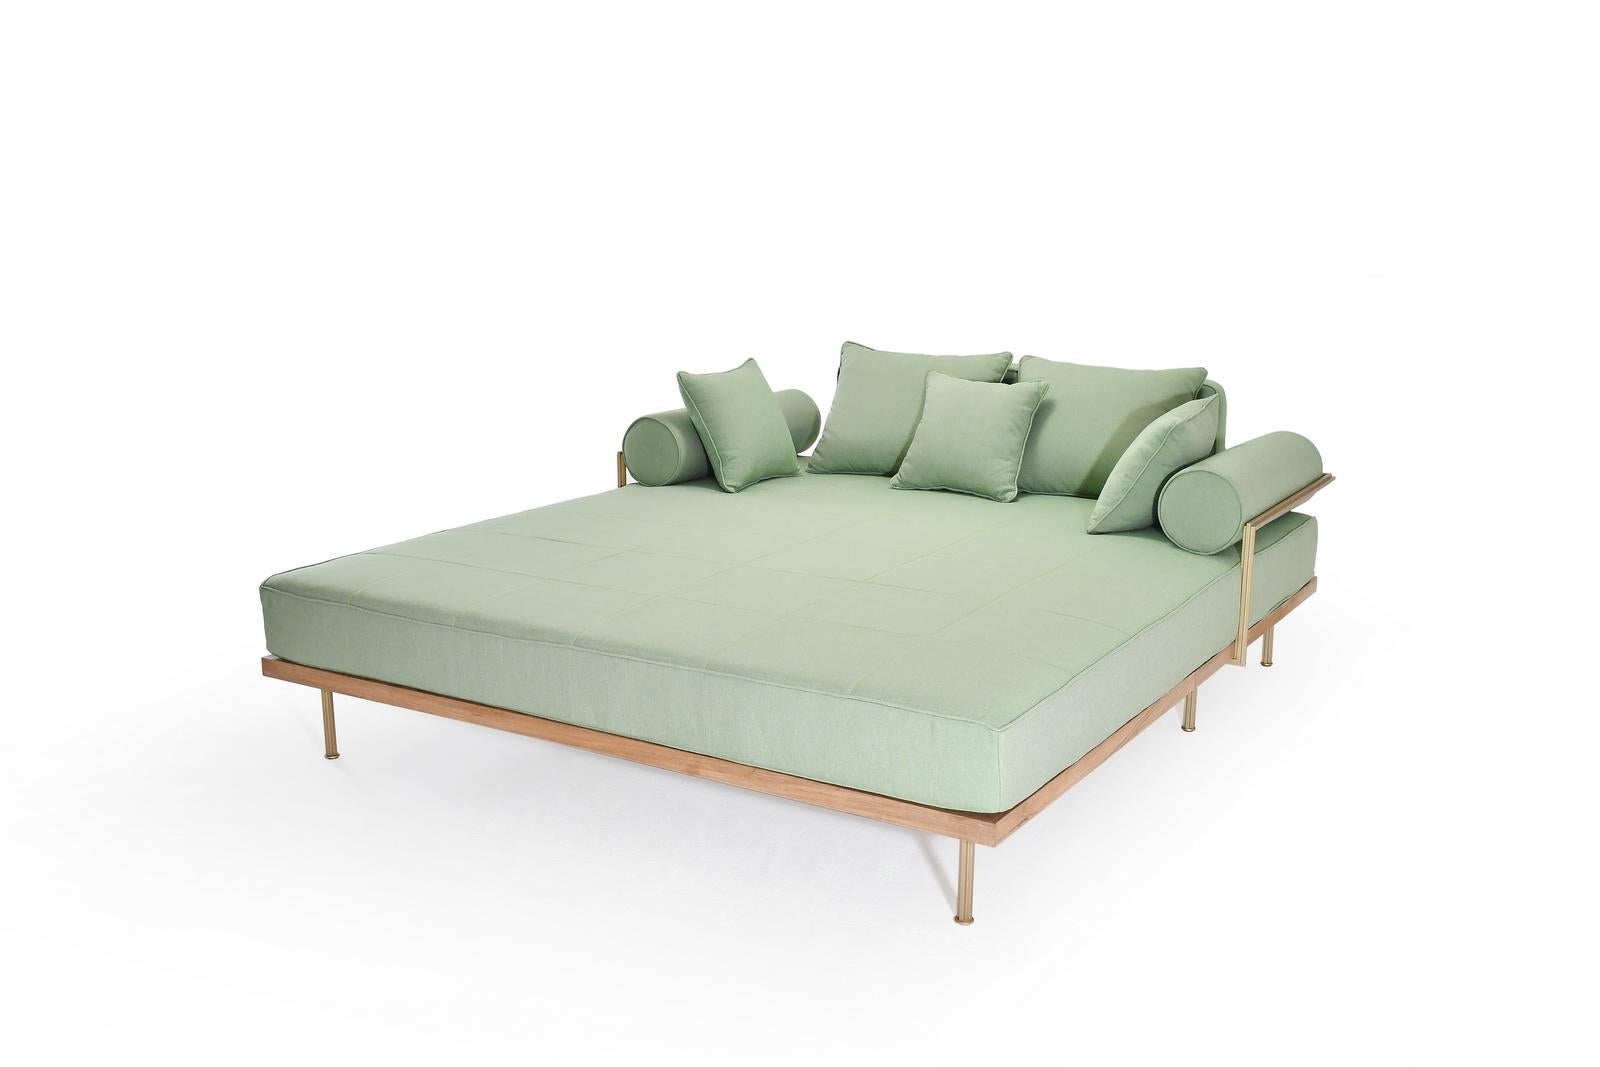 Mid-Century Modern Bespoke Outdoor Lounge Bed in Brass & Bleached Hardwood Frame, by P. Tendercool For Sale